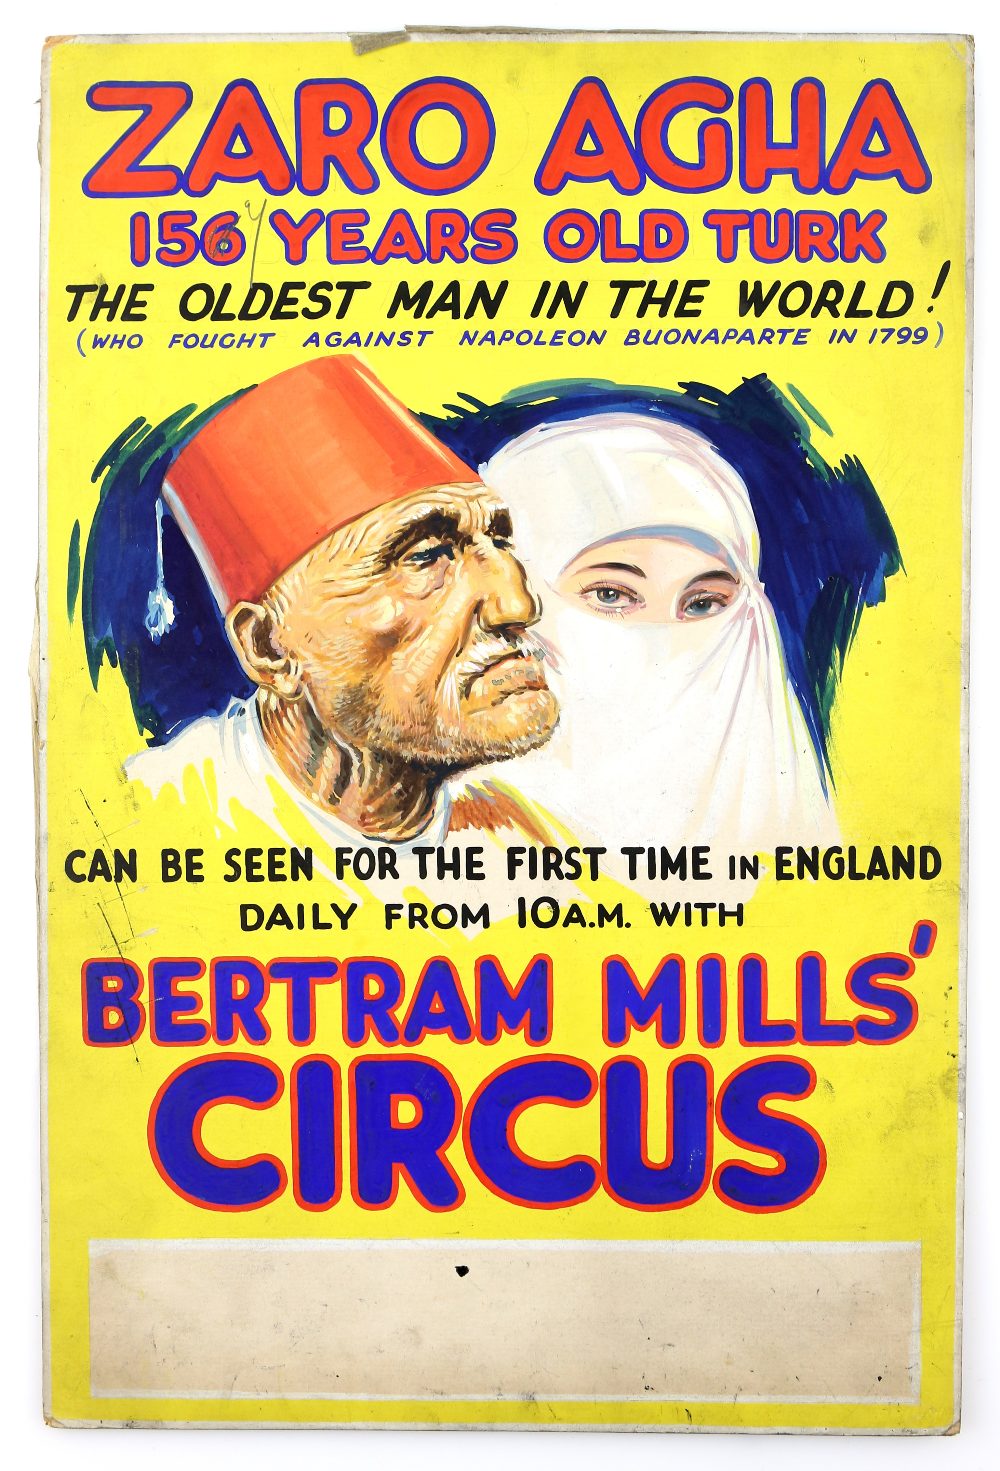 Bertram Mills Circus - 'Zaro Agha', '156 years old Turk, The oldest man in the World! Who fought